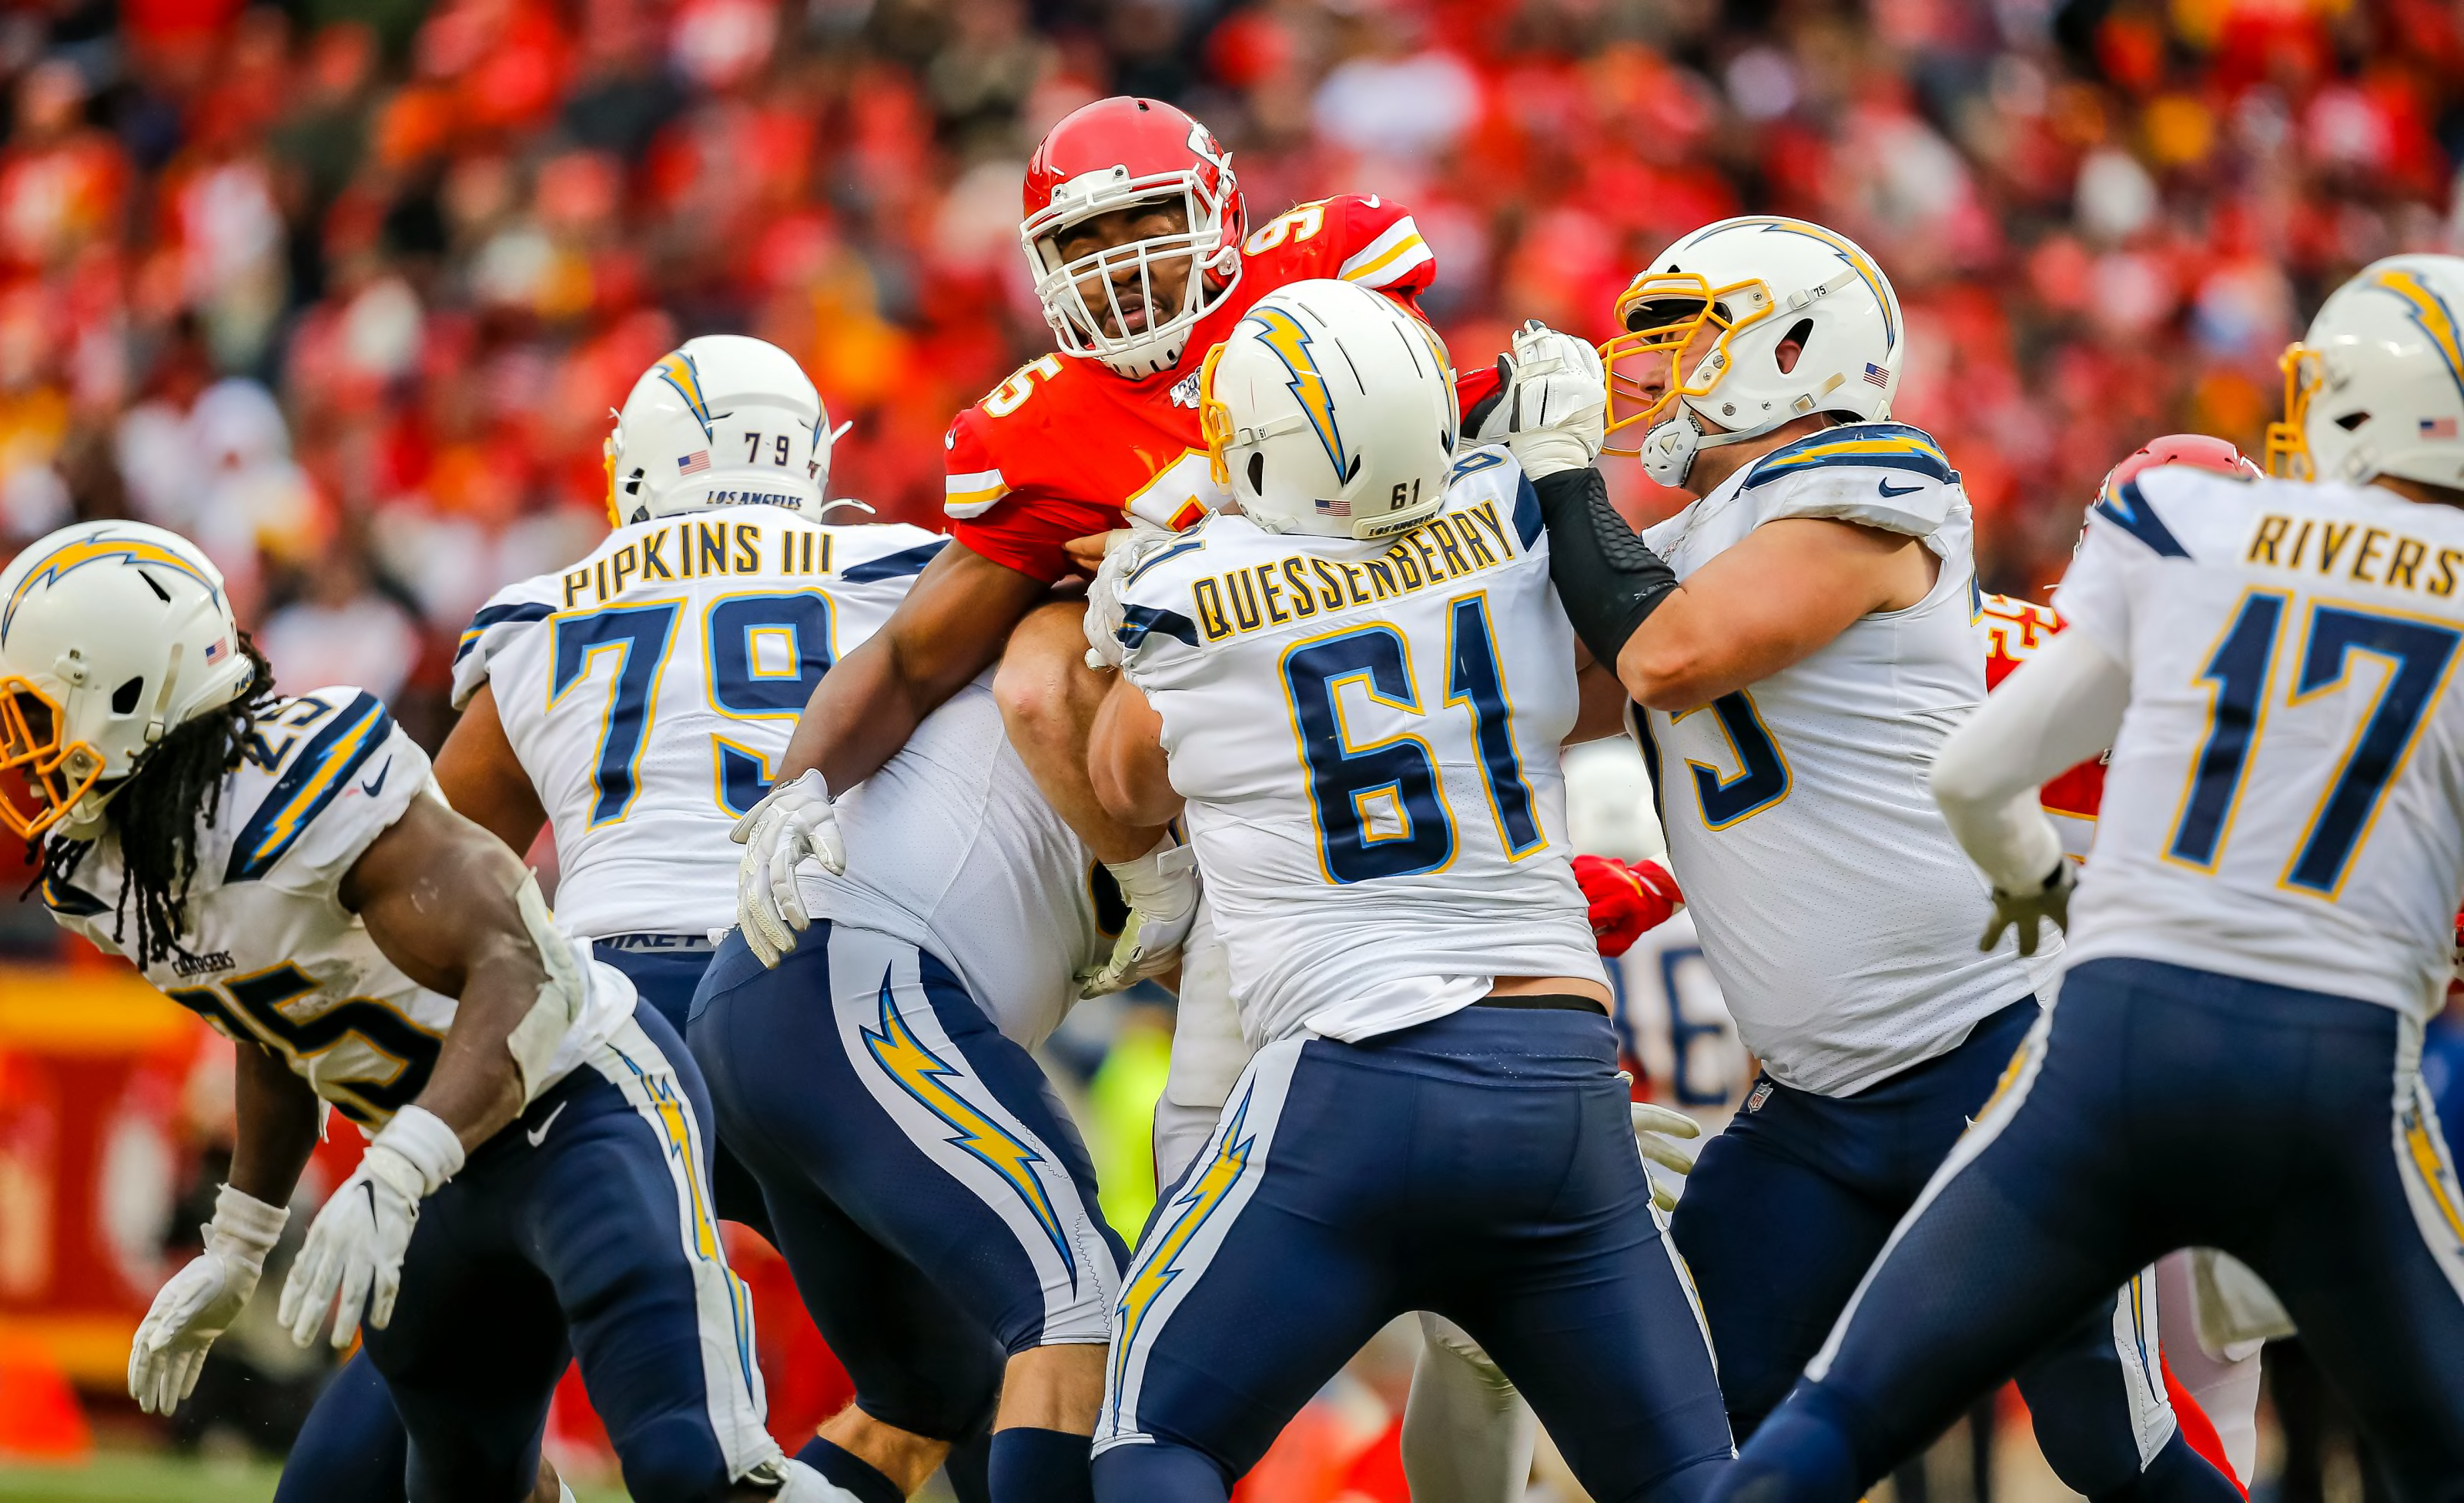 Chiefs vs Chargers, Week 2: By the numbers